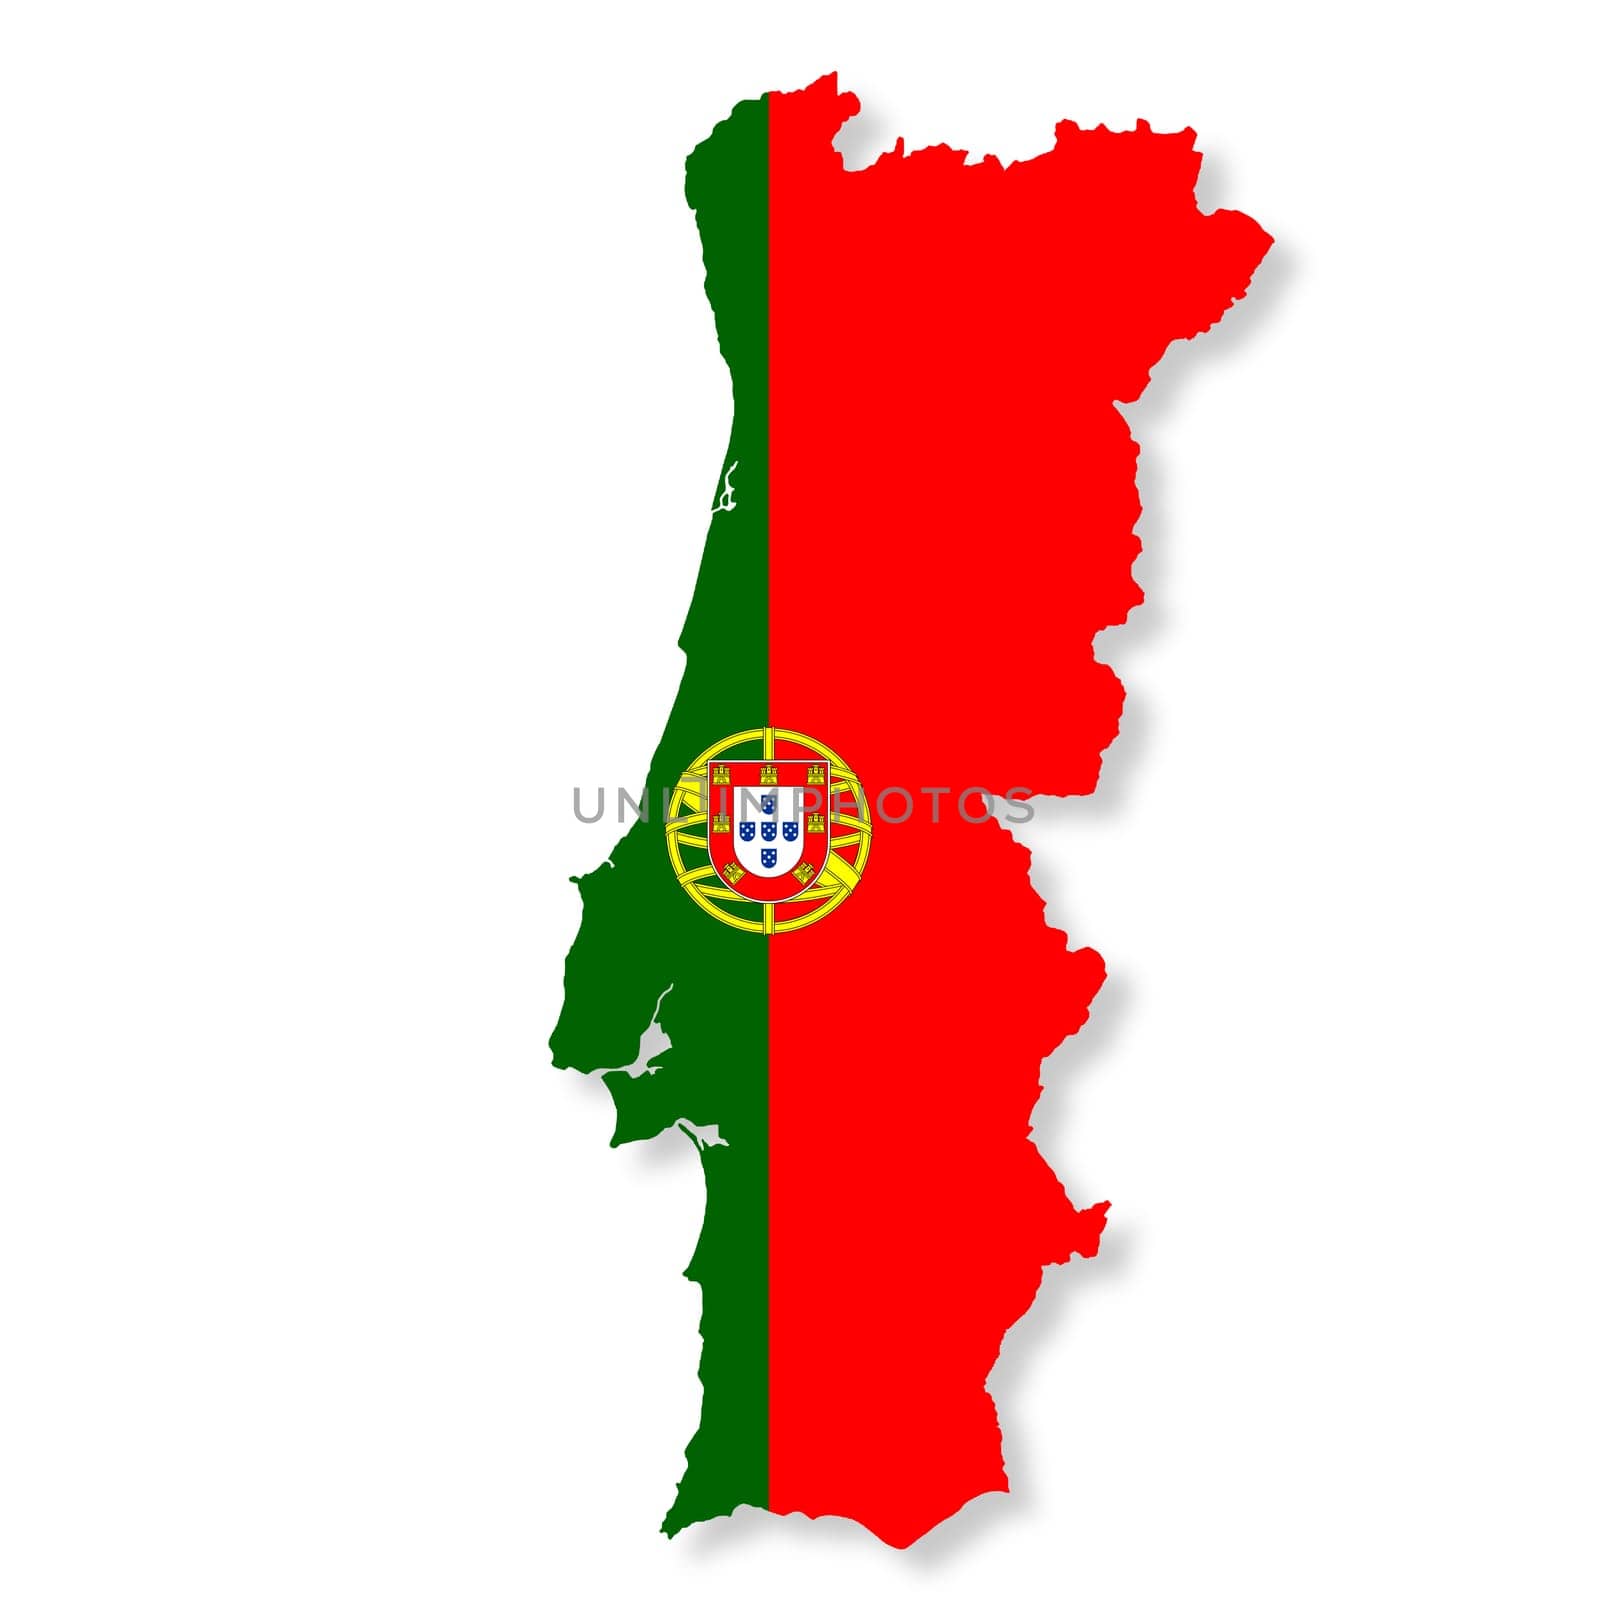 Portugal flag map with clipping path by VivacityImages